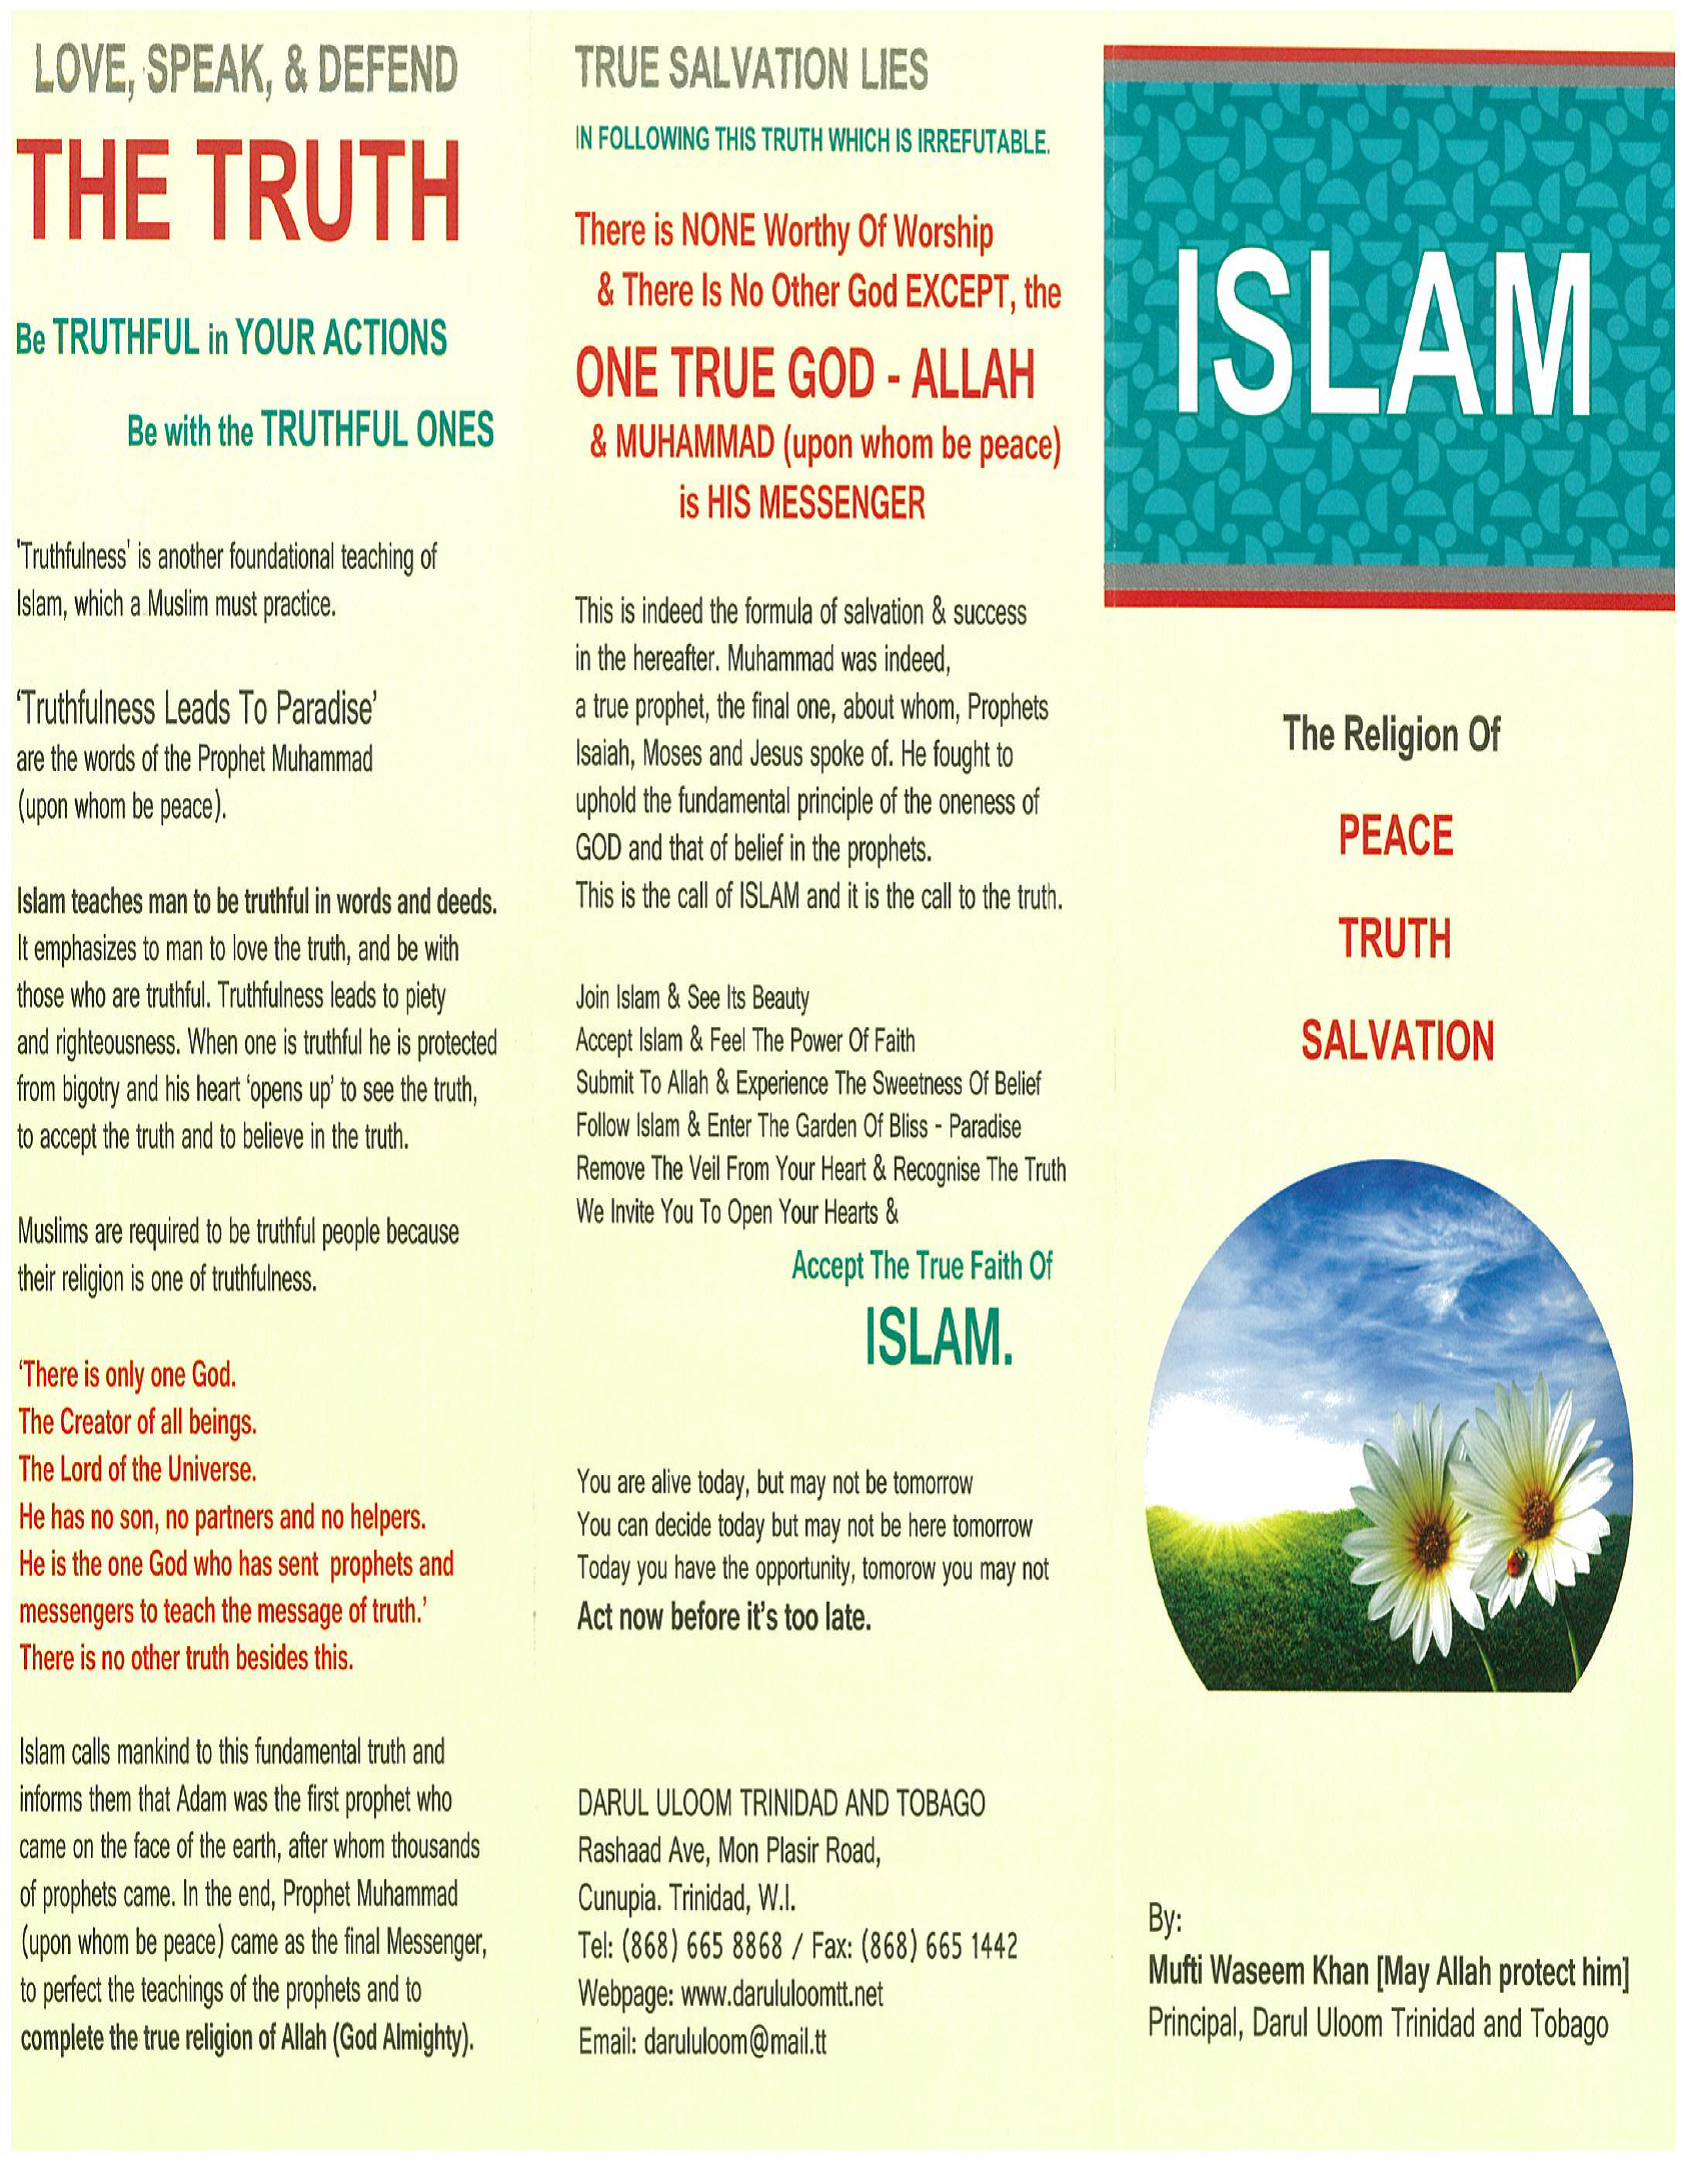 Islam The Religion of Peace, Truth and Salvation (Palm Flex)